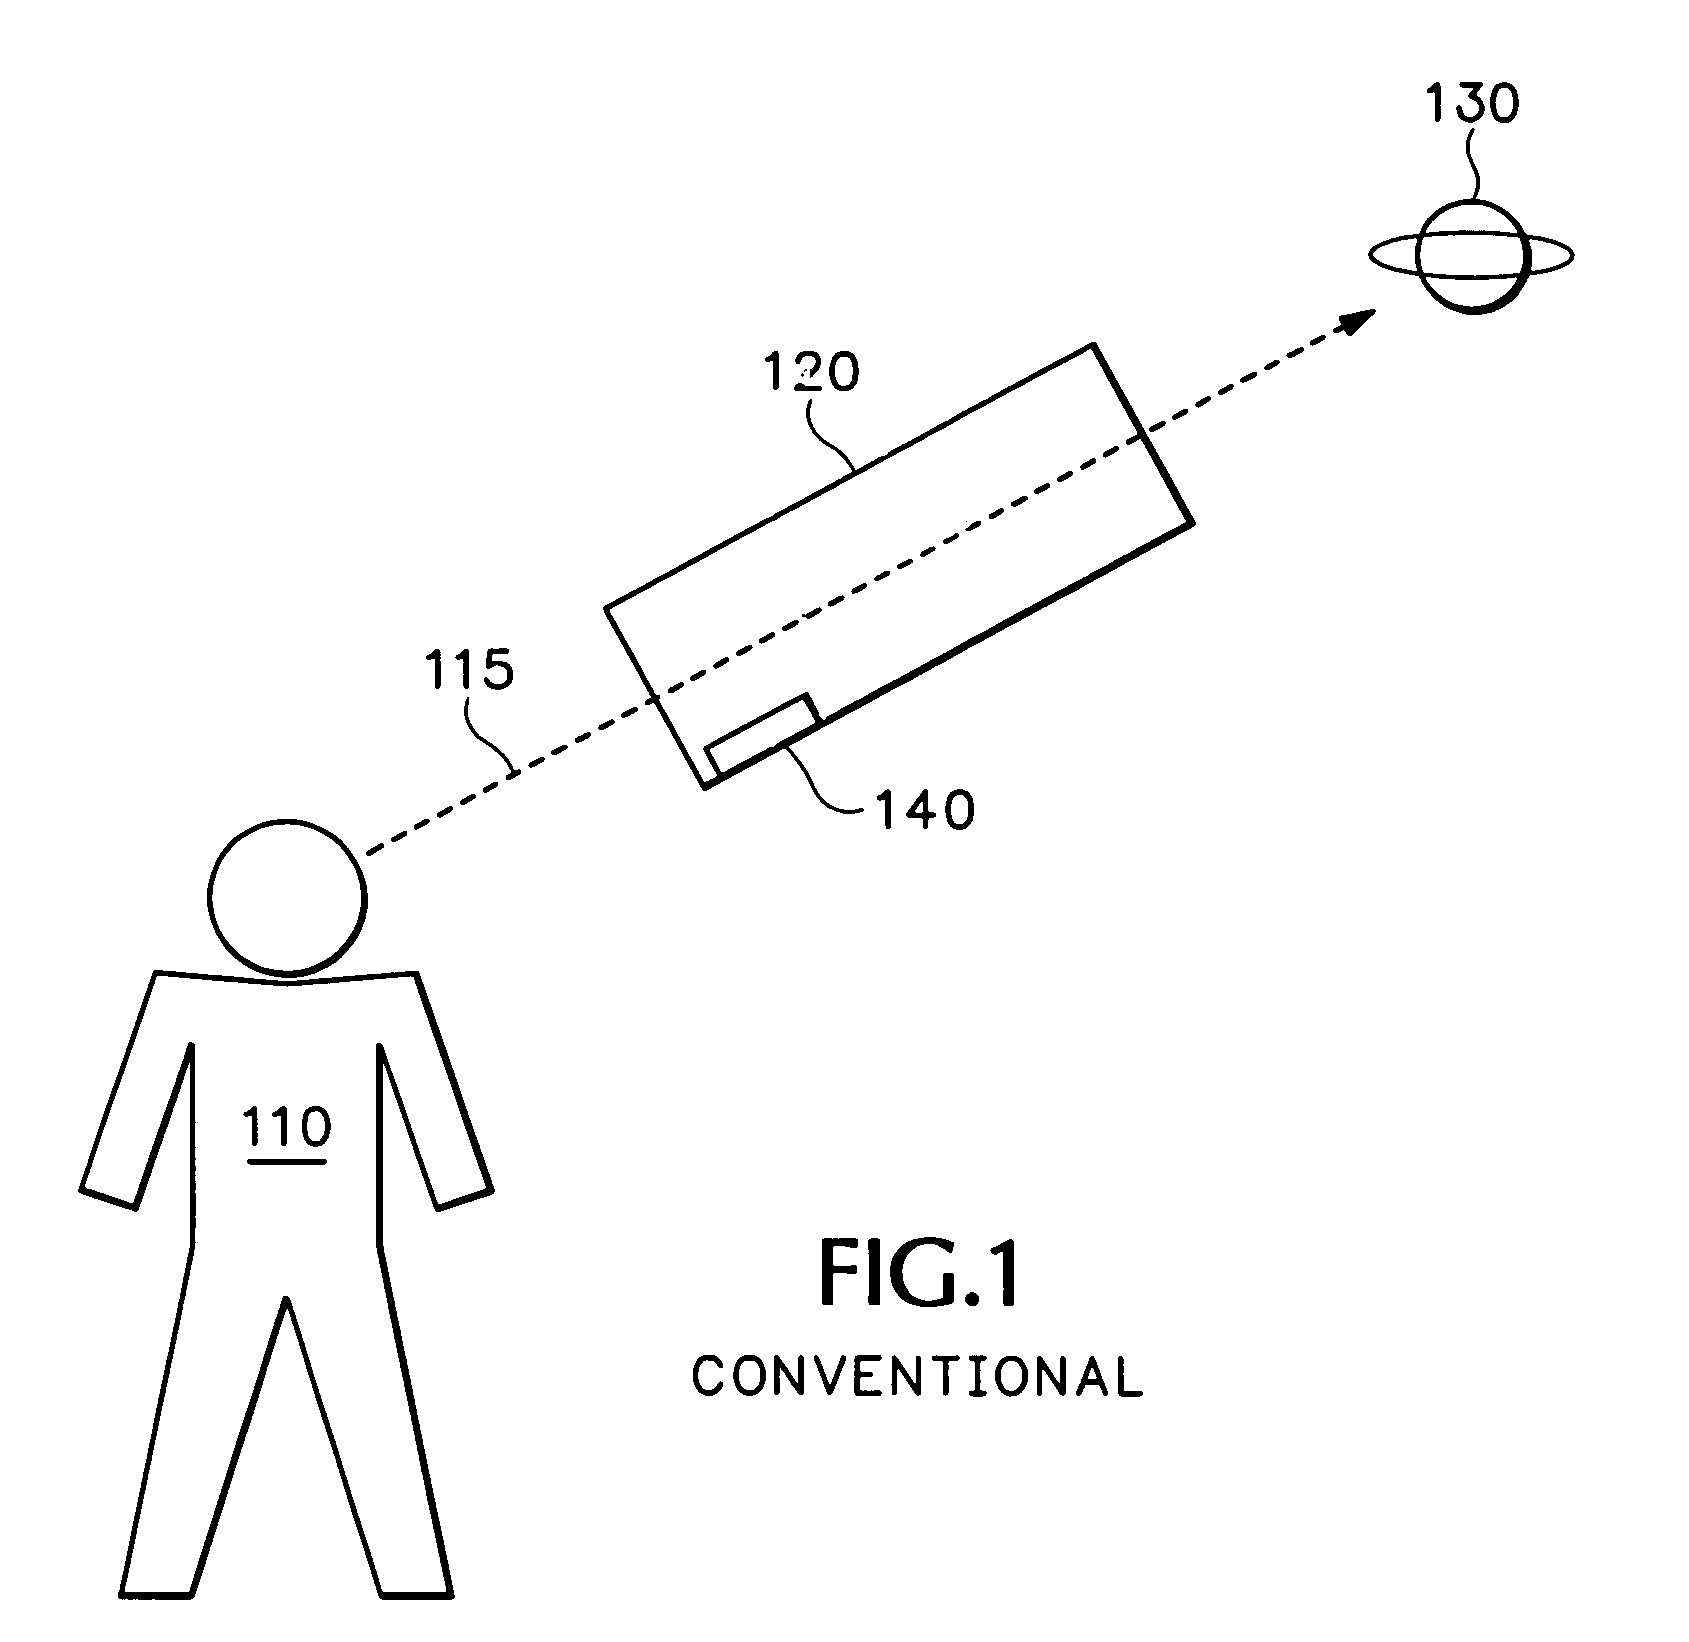 Laser guided celestial identification device